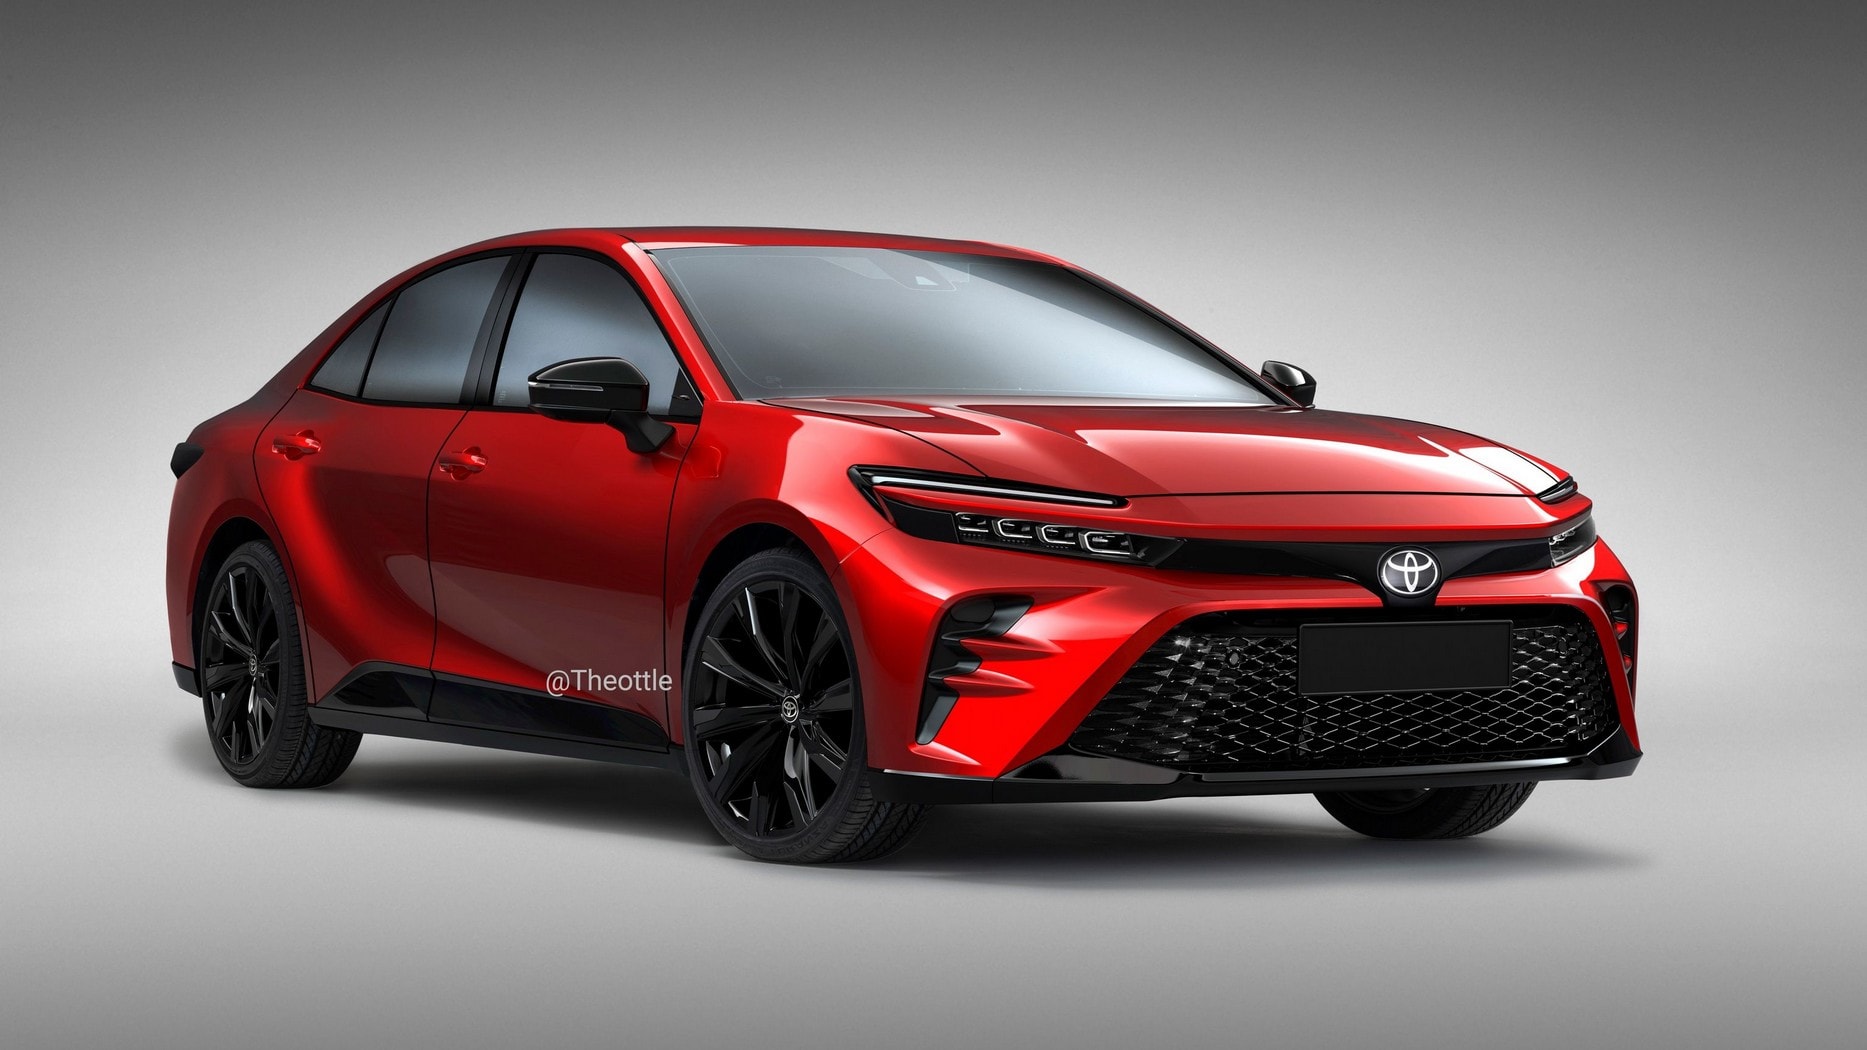 Could the Toyota Camry Based on the Crown Sport Concept Beat the RAV4